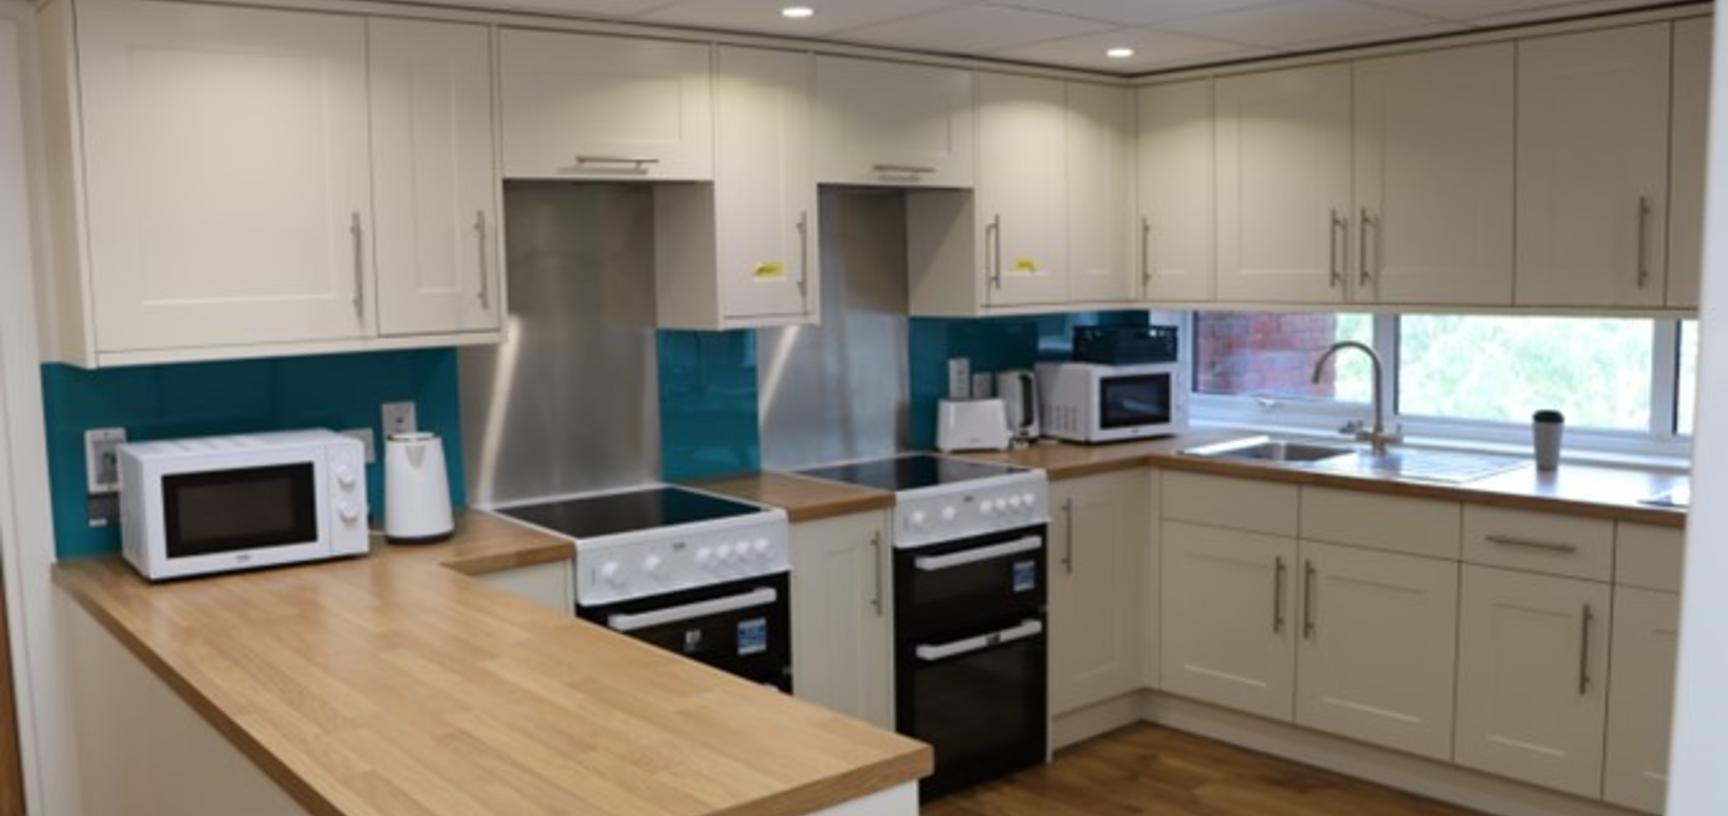 eight bed cluster kitchen